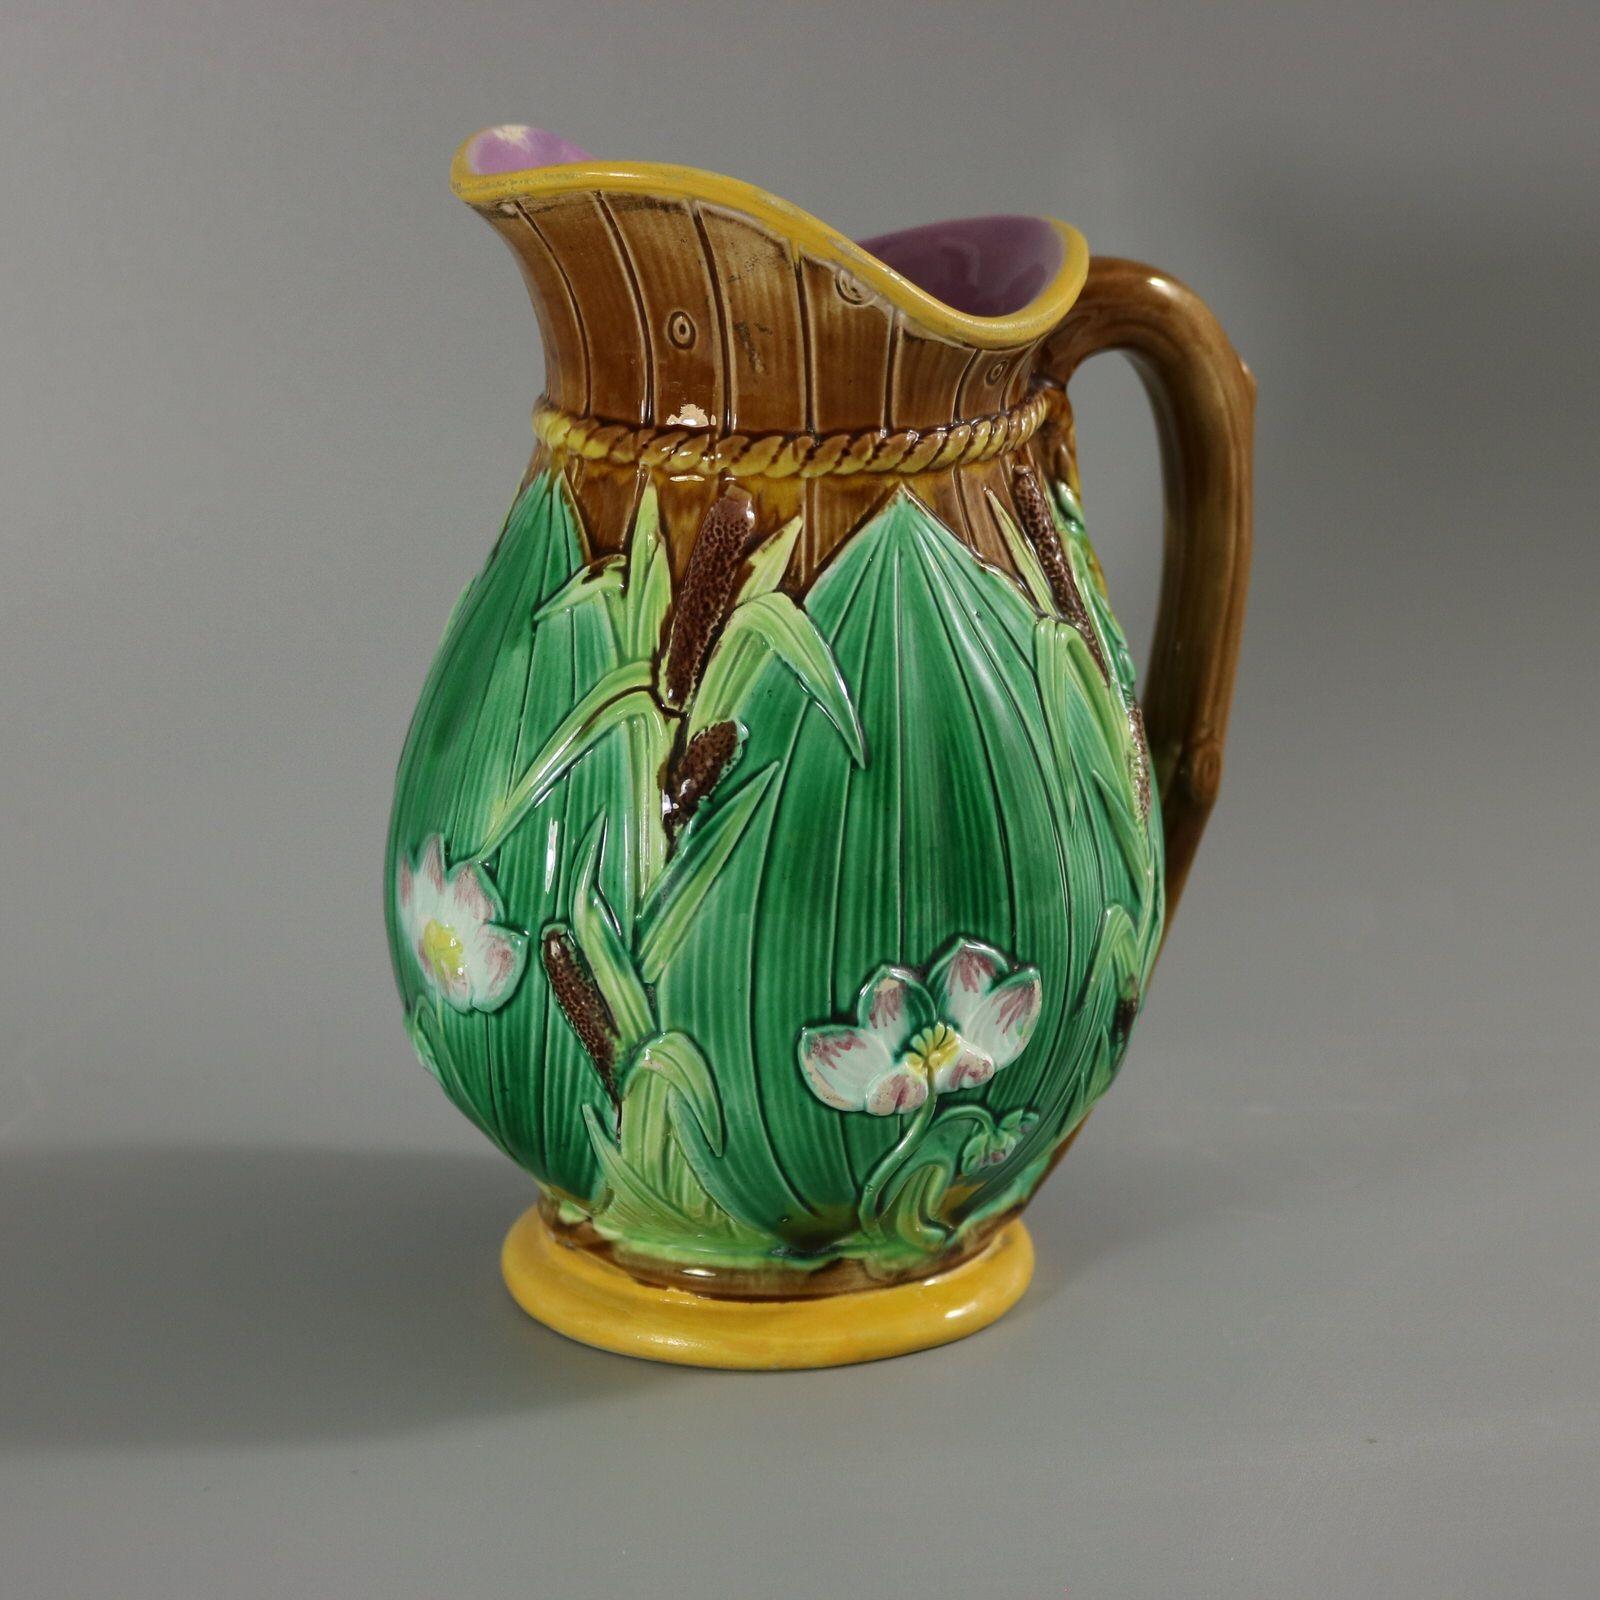 George Jones Majolica jug/pitcher which features lilies on a brown barrel ground. Colouration: brown, green, white, are predominant. Bears a pattern number, '1800'.